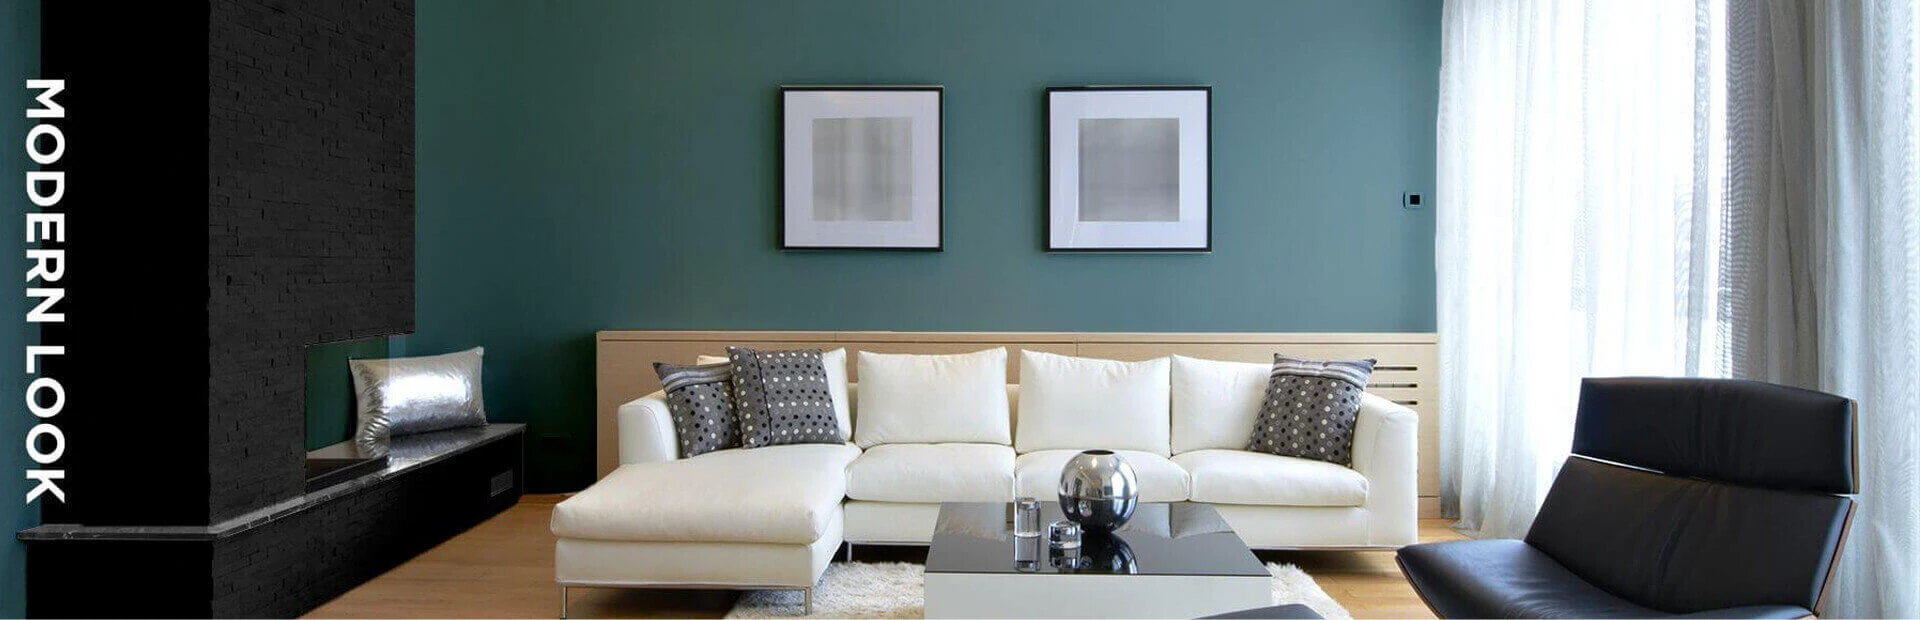 Living Room in shades of grey, green and beige featuring furniture and paintings on walls.